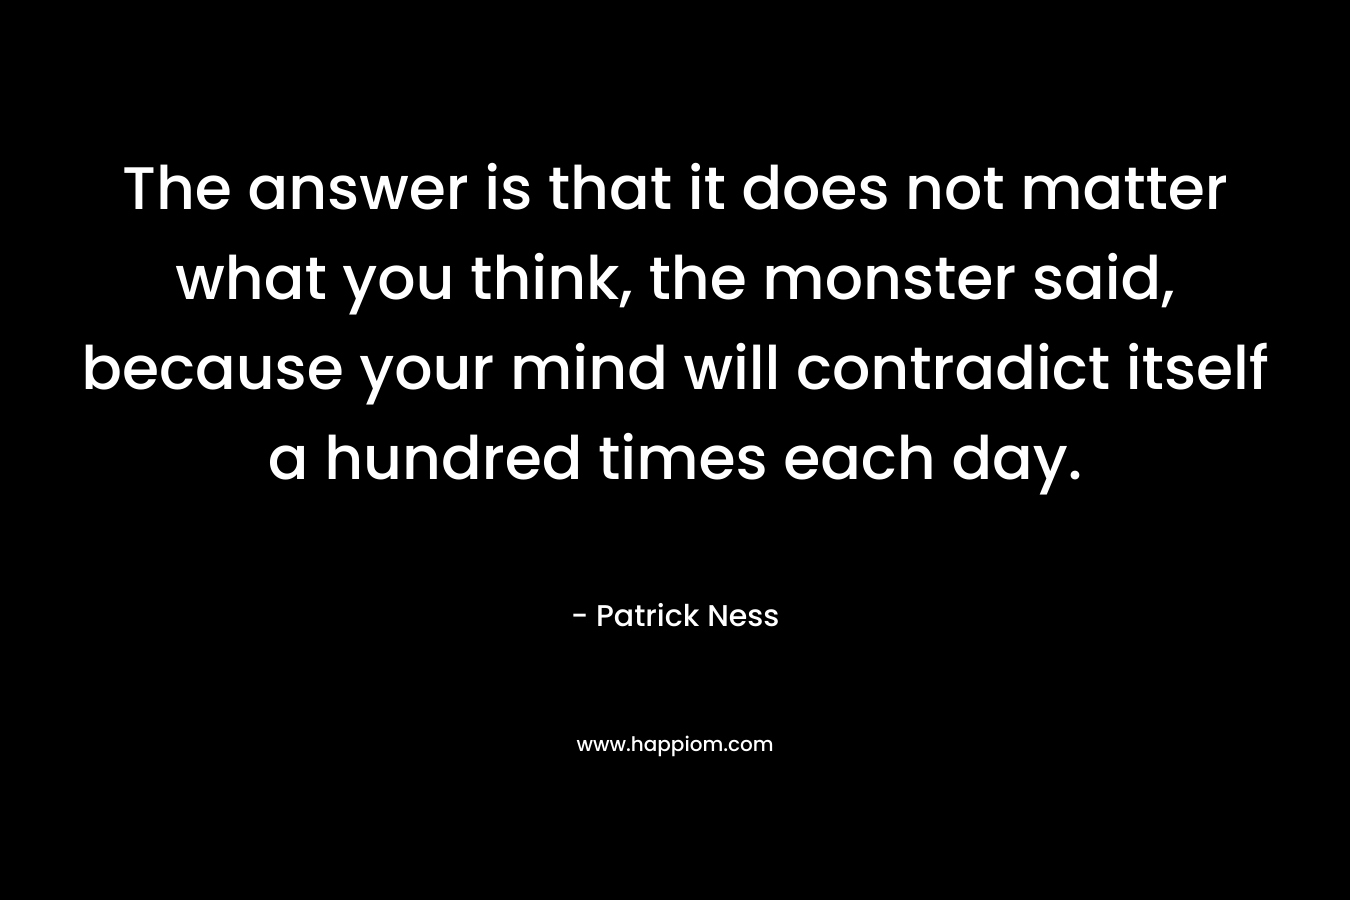 The answer is that it does not matter what you think, the monster said, because your mind will contradict itself a hundred times each day. – Patrick Ness